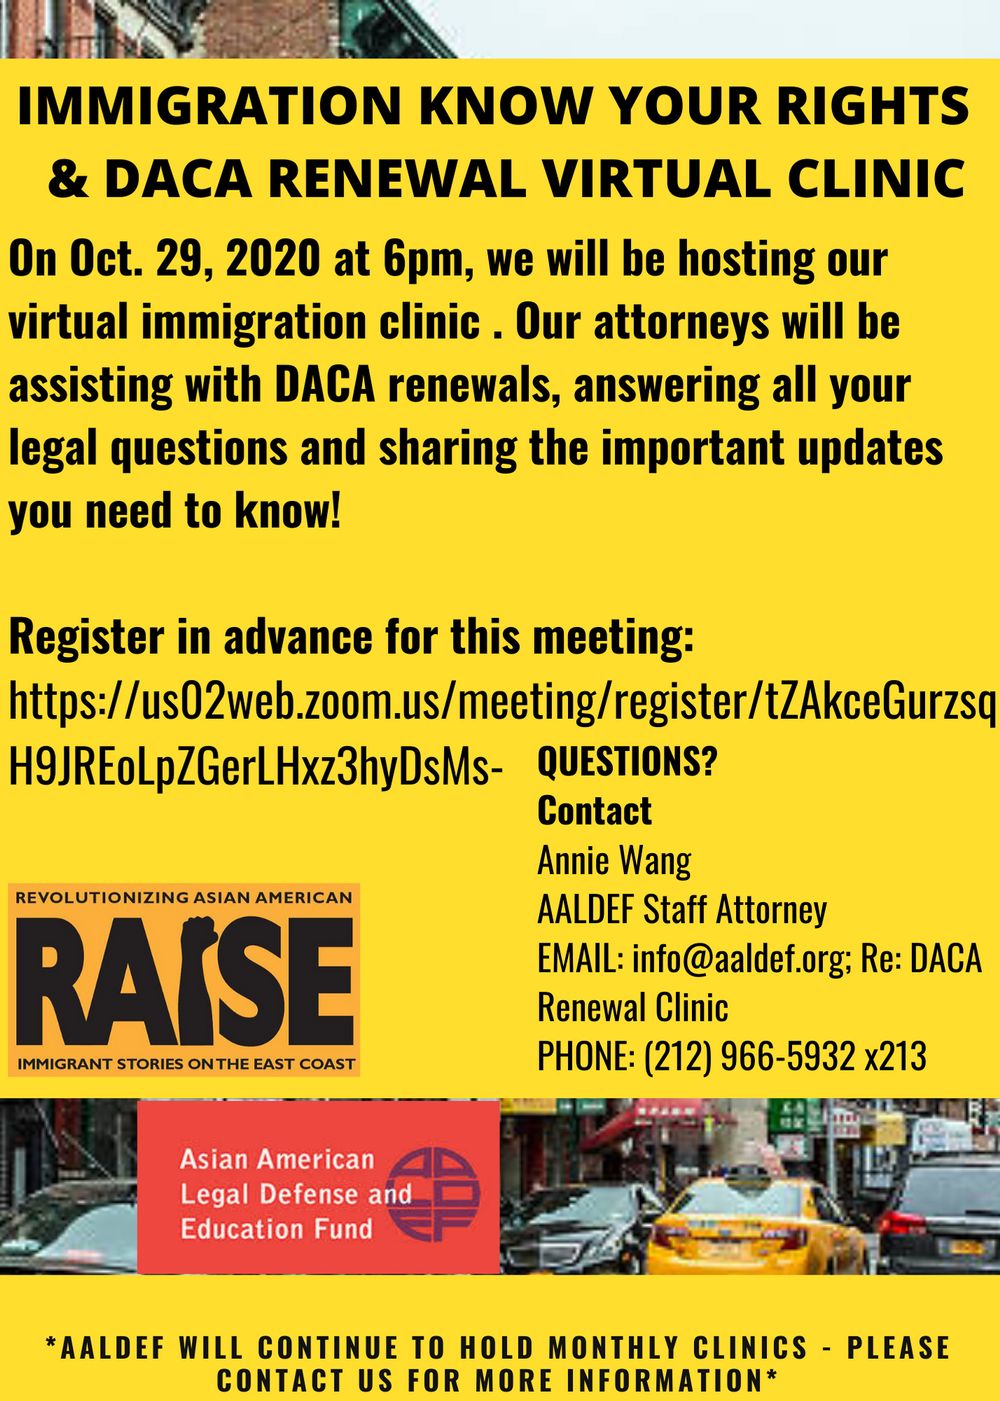 Image for Oct. 29 - AALDEF immigration/DACA renewal clinic